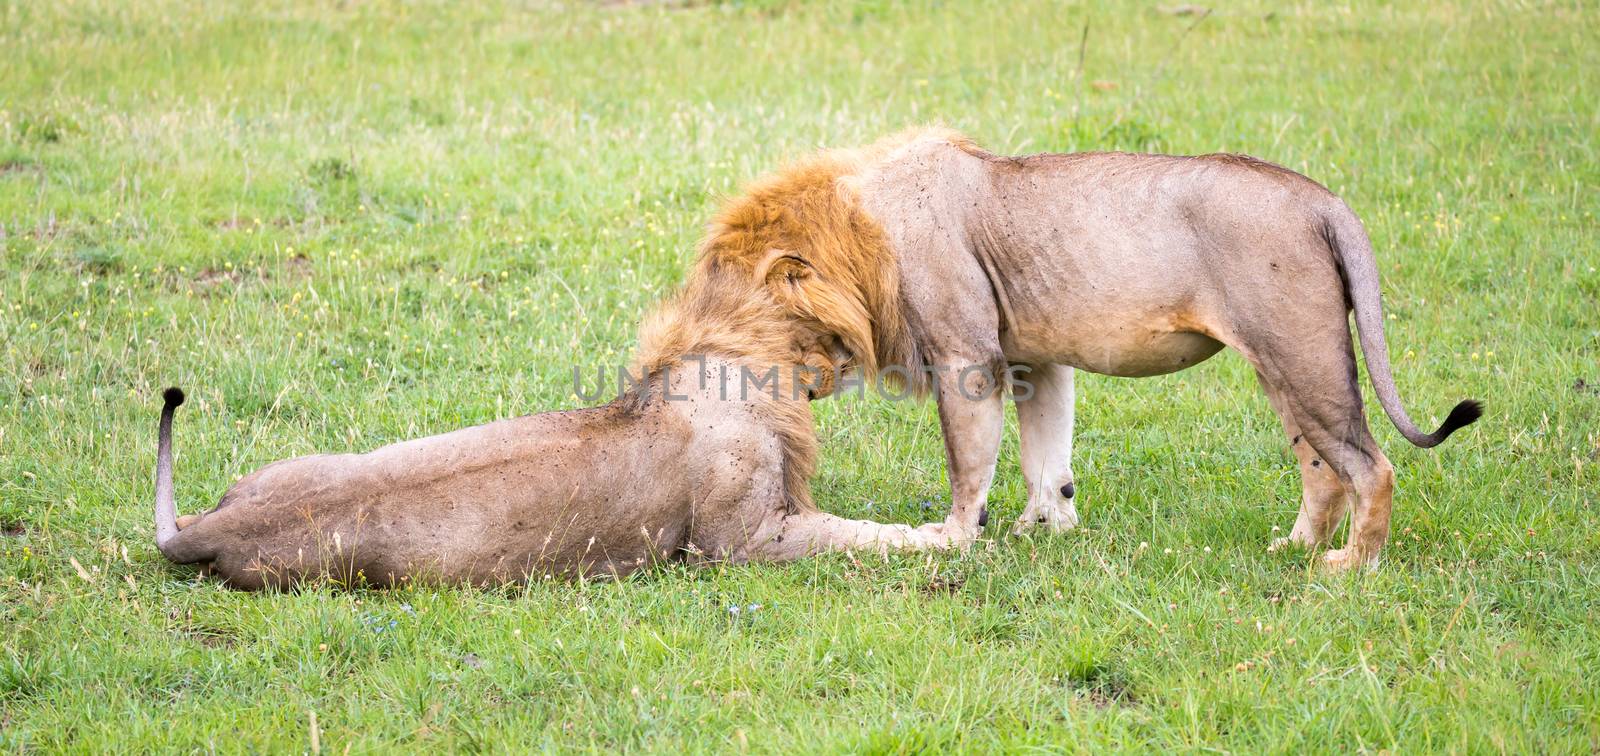 Two big lions show their emotions to each other in the savanna o by 25ehaag6